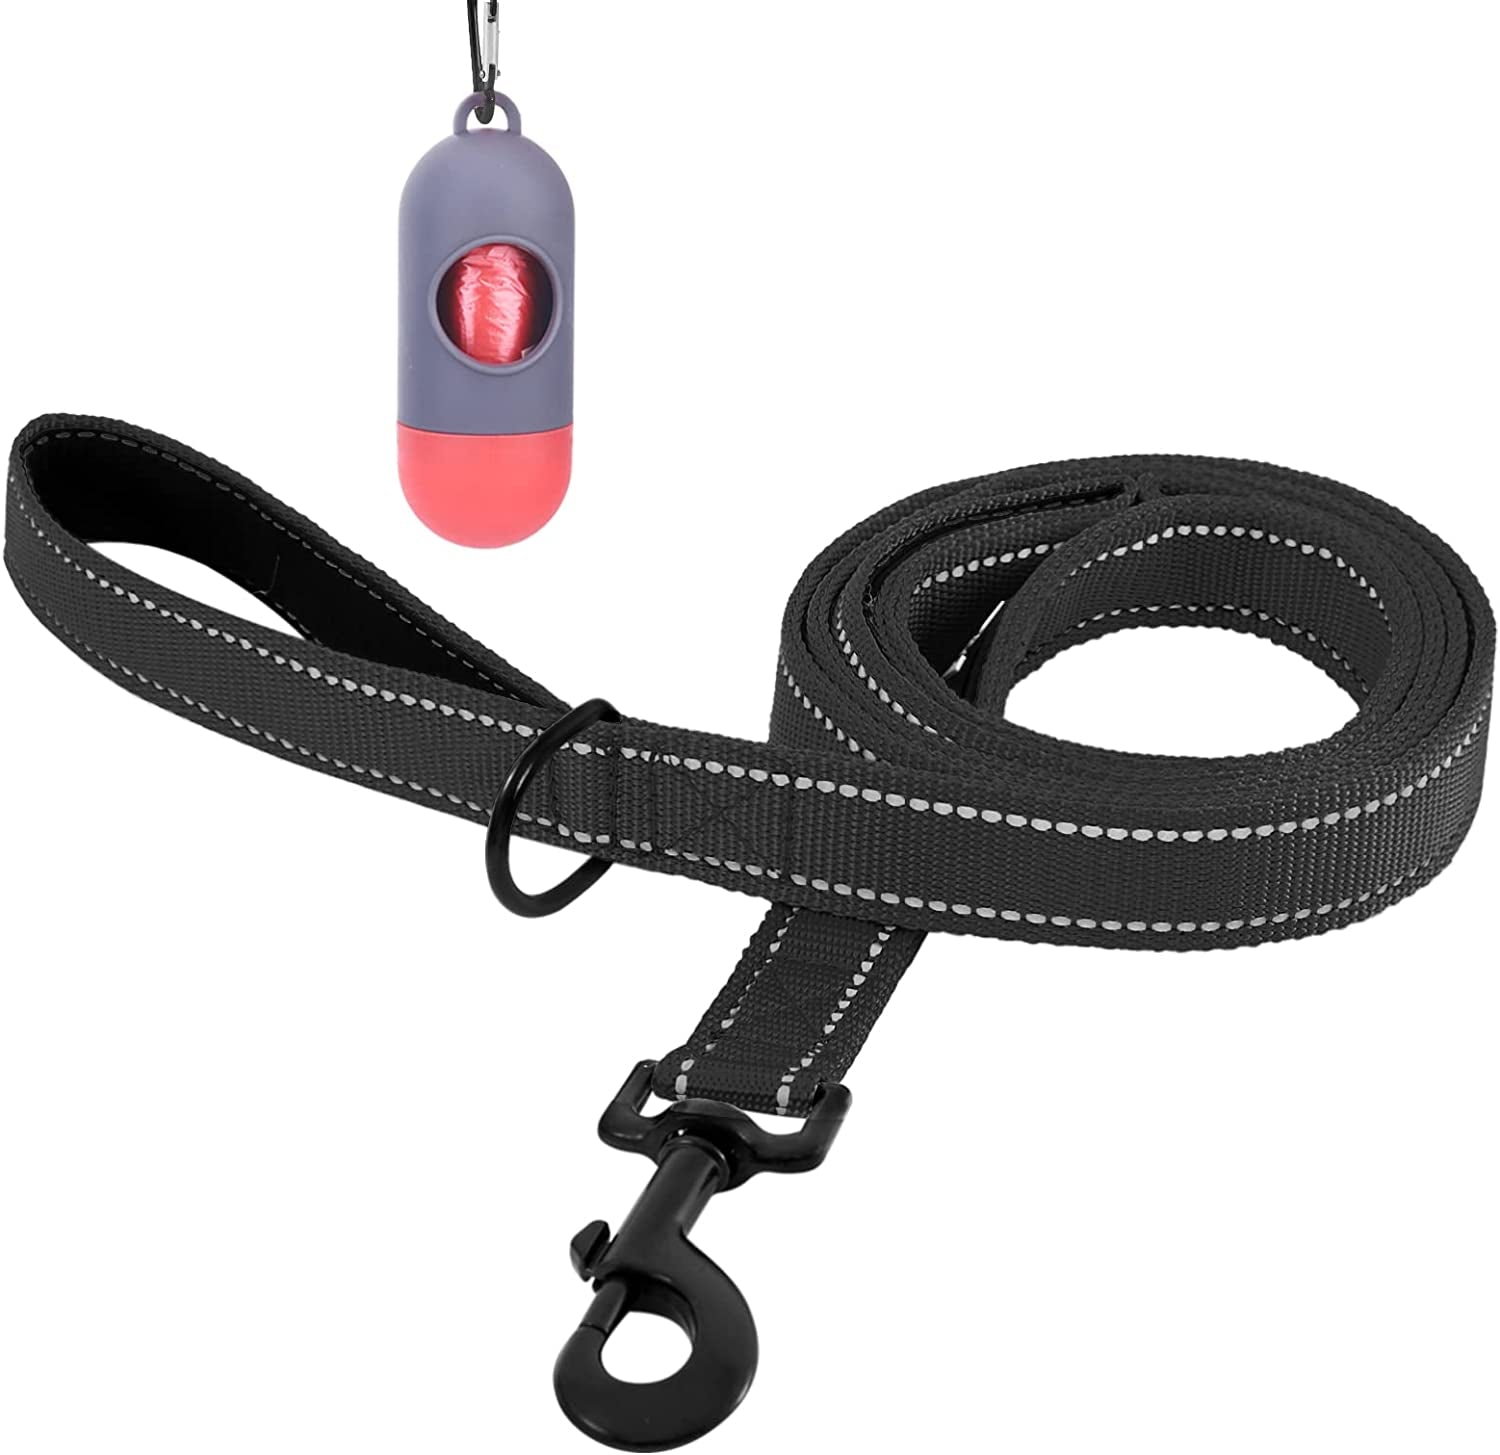 5Ft Dog Leash, Heavy Duty Rope Leash with 2 Padded Handle – Pet Training Lead with 3M Reflective Double Handle for Traffic Control Safety, Perfect for Large Medium or Small Dog (Black)